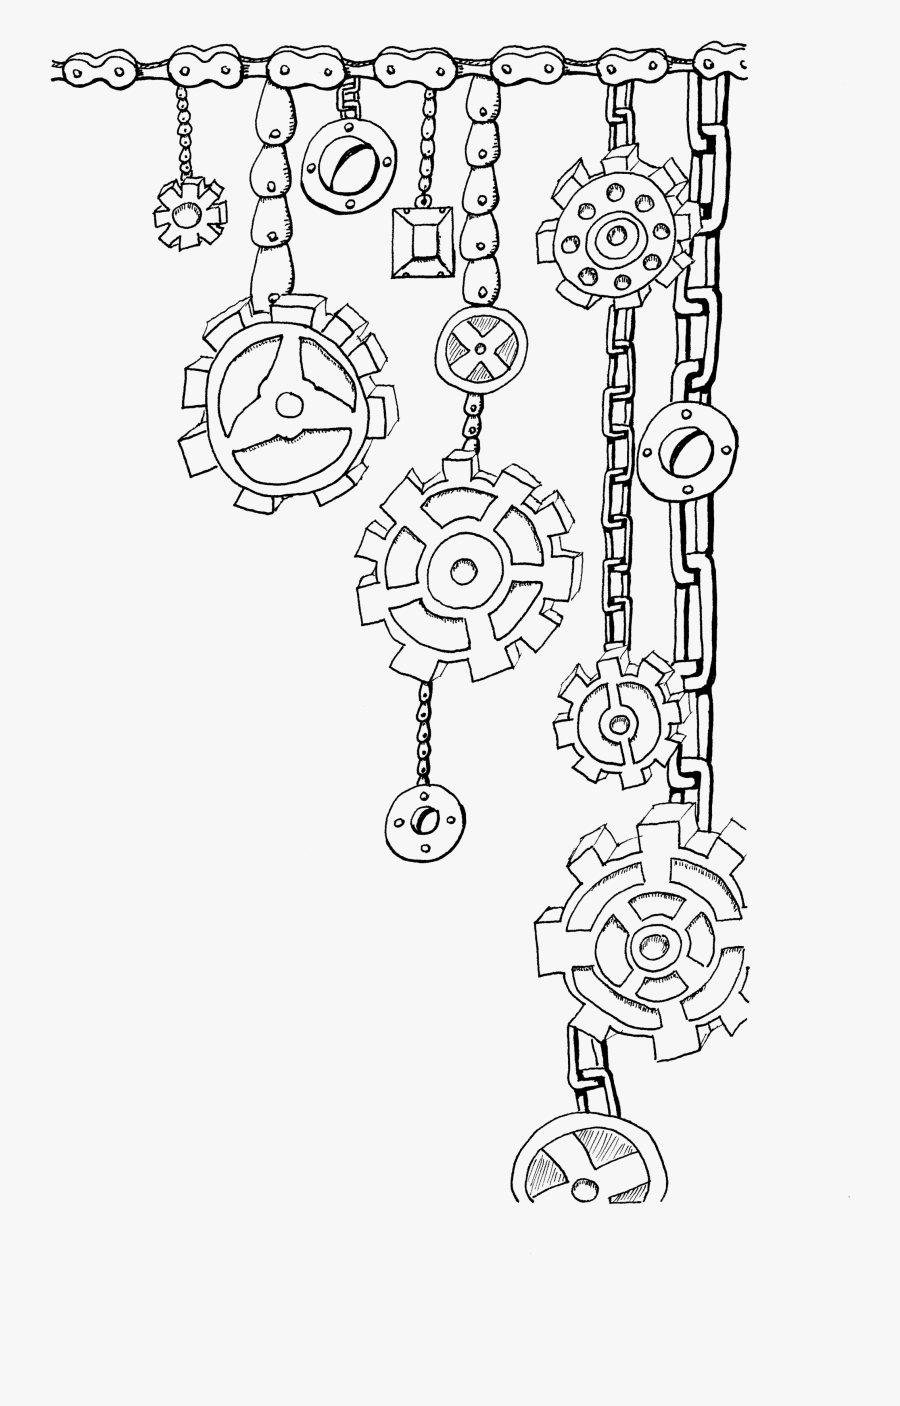 Steampunk Charming1 Clear - Steampunk Gears And Cogs Drawing, Transparent Clipart